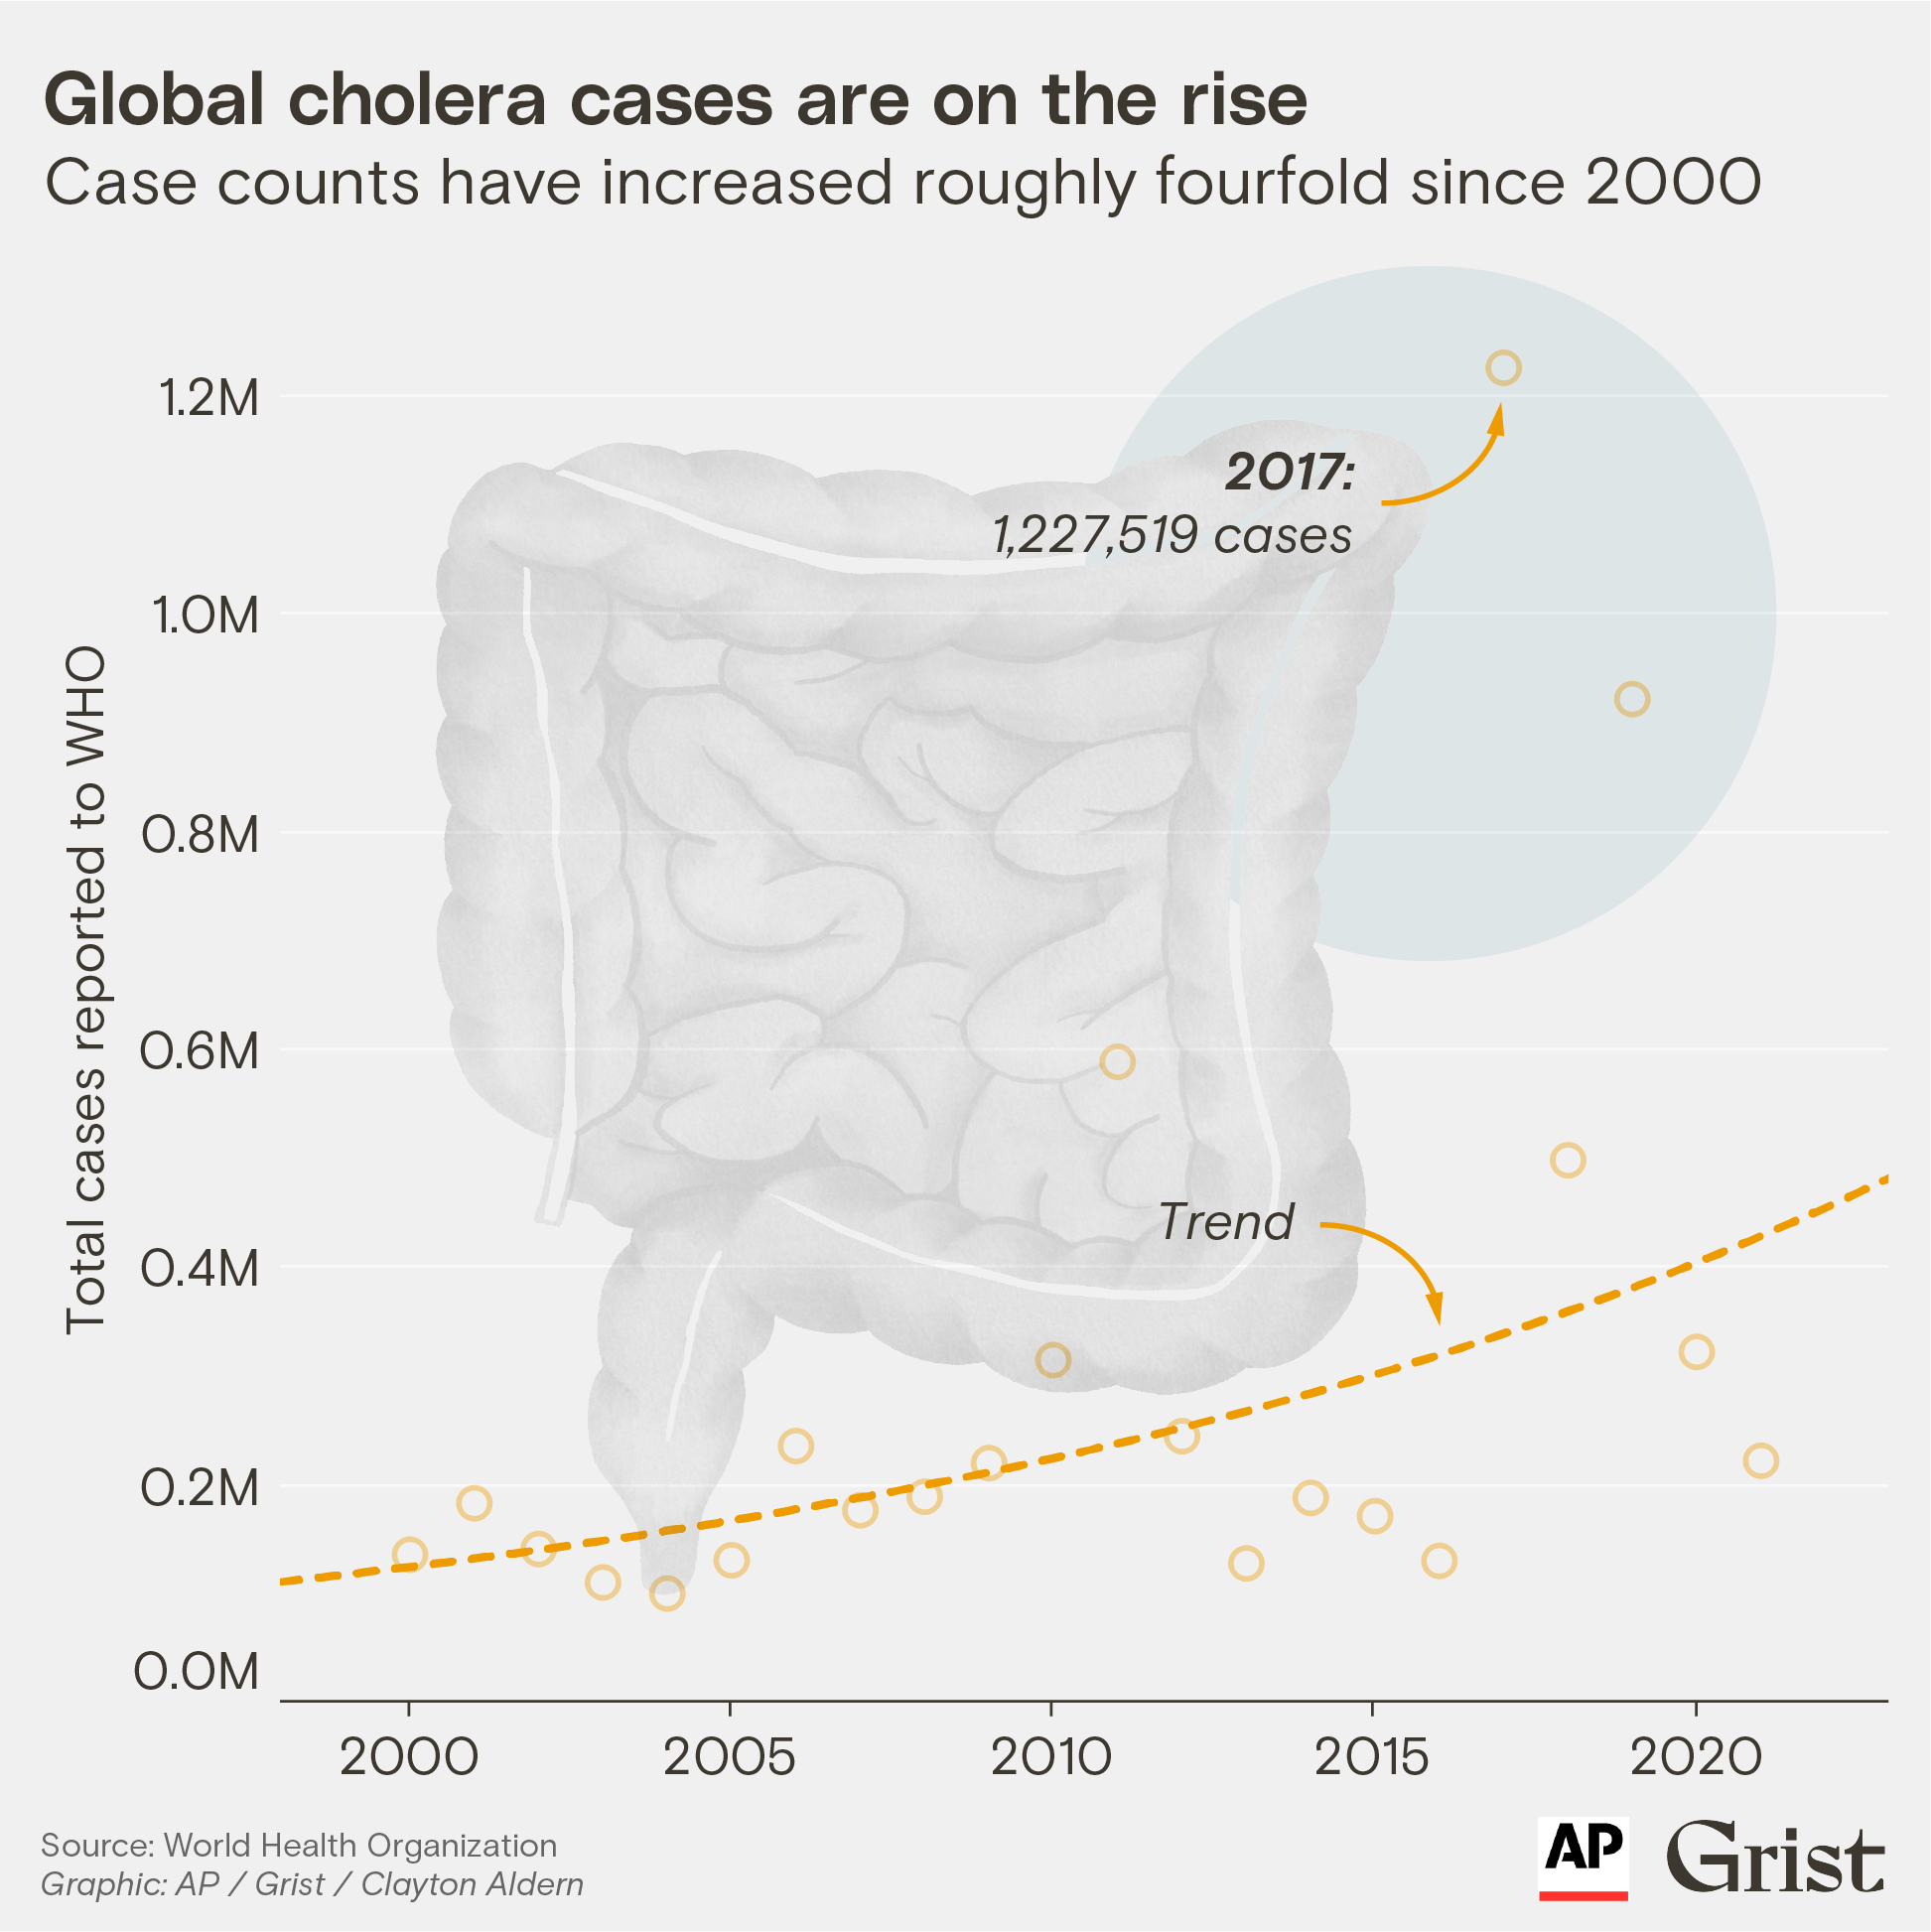 A line chart showing that global cholera cases have increased roughly fourfold since 2000